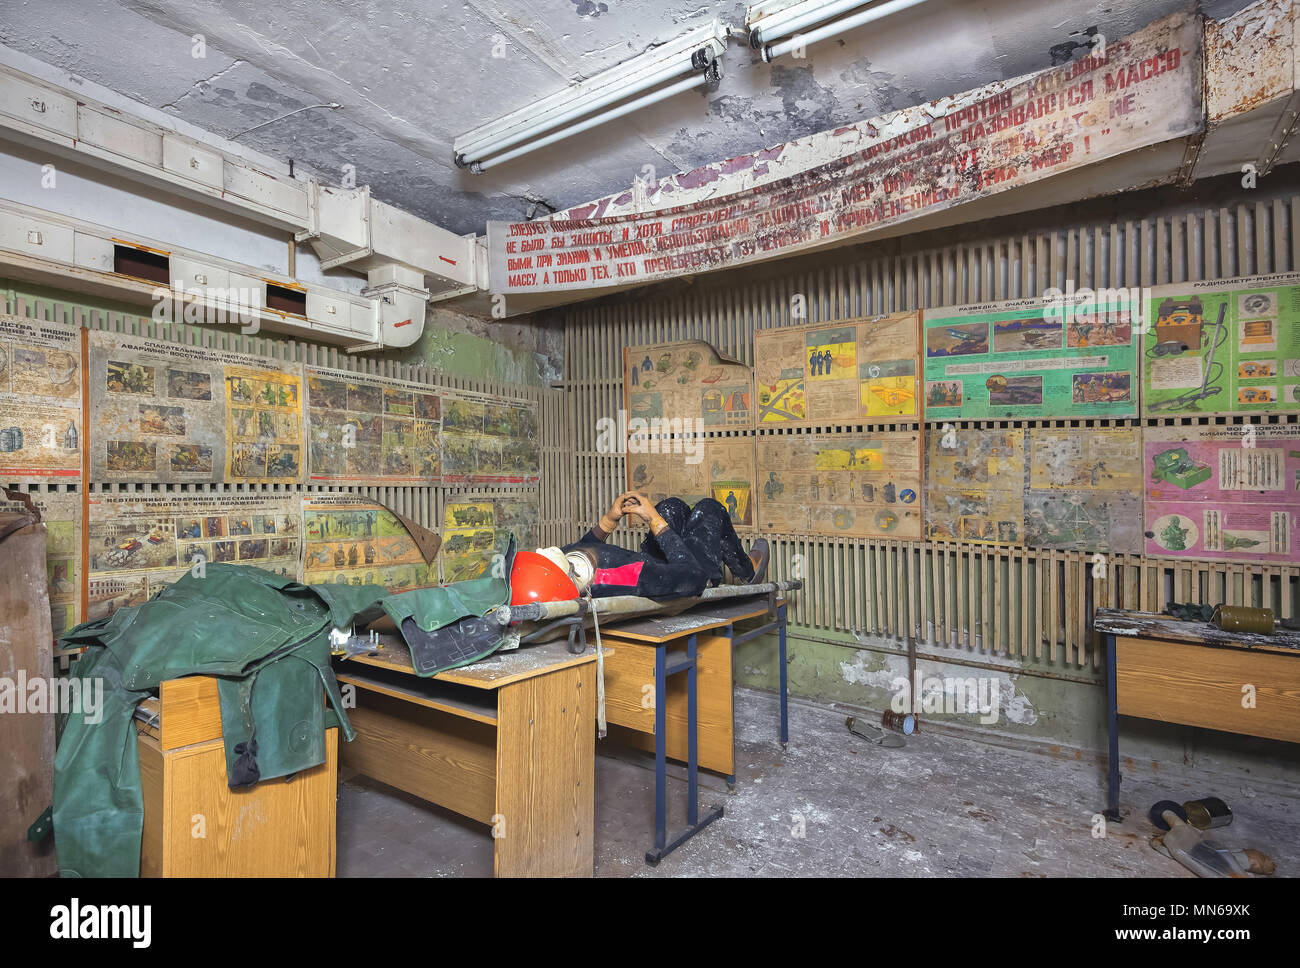 Room in an abandoned air-raid shelter during the Cold War with the Soviet slogan under the ceiling. Training class on civil defense with old desks, po Stock Photo